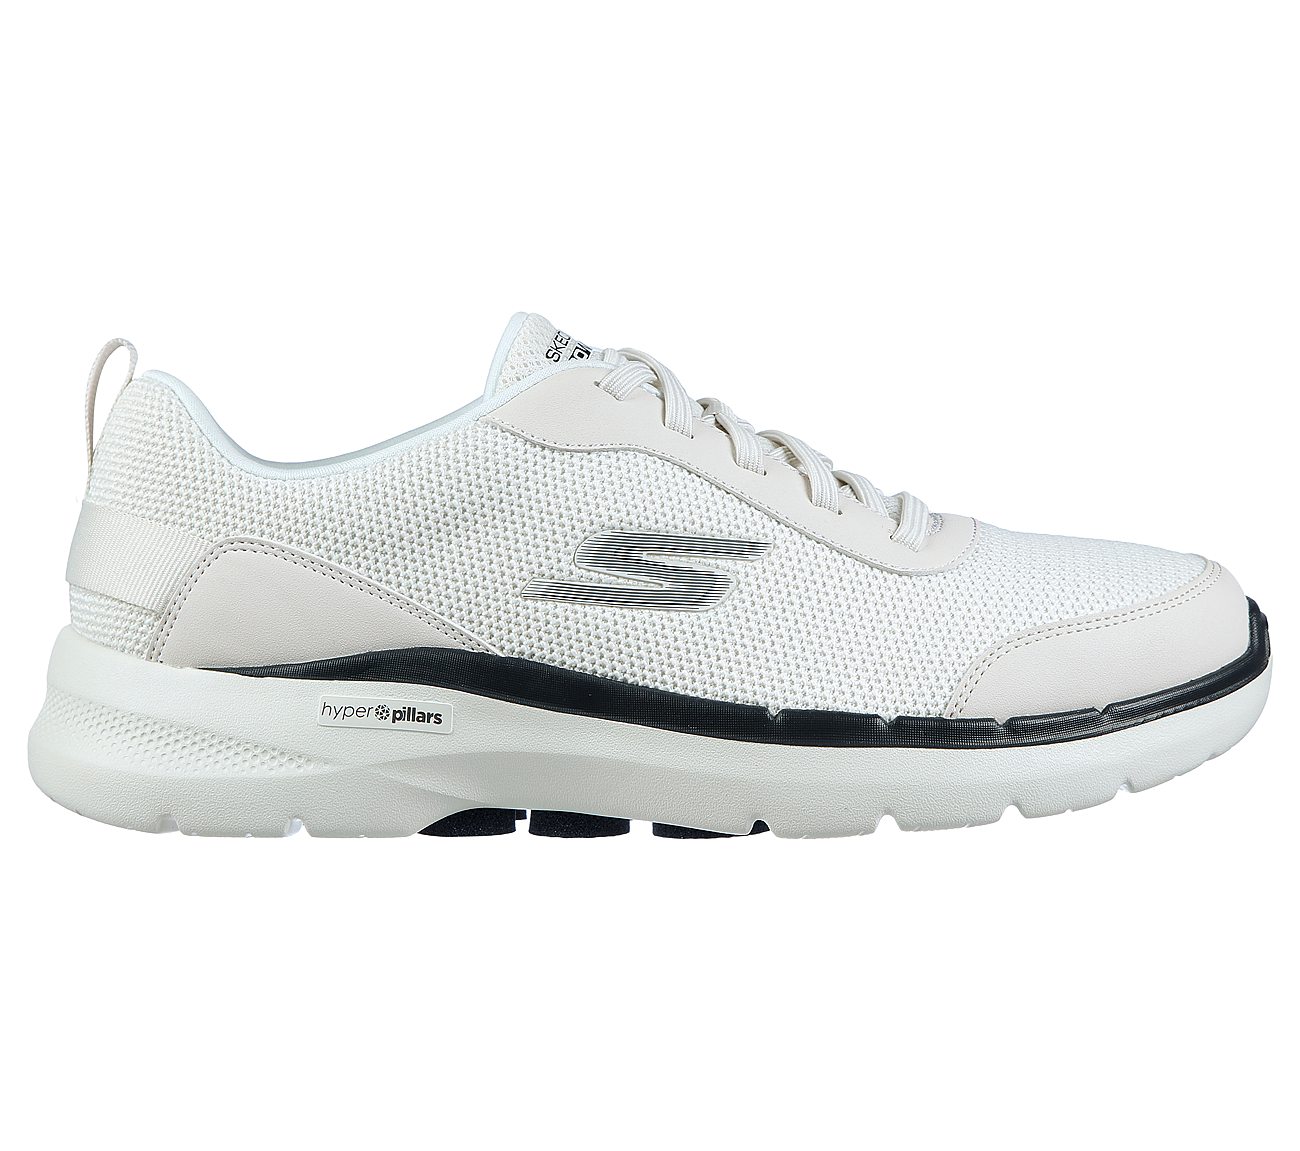 GO WALK 6 - BOLD KNIGHT, WHITE/NAVY Footwear Lateral View